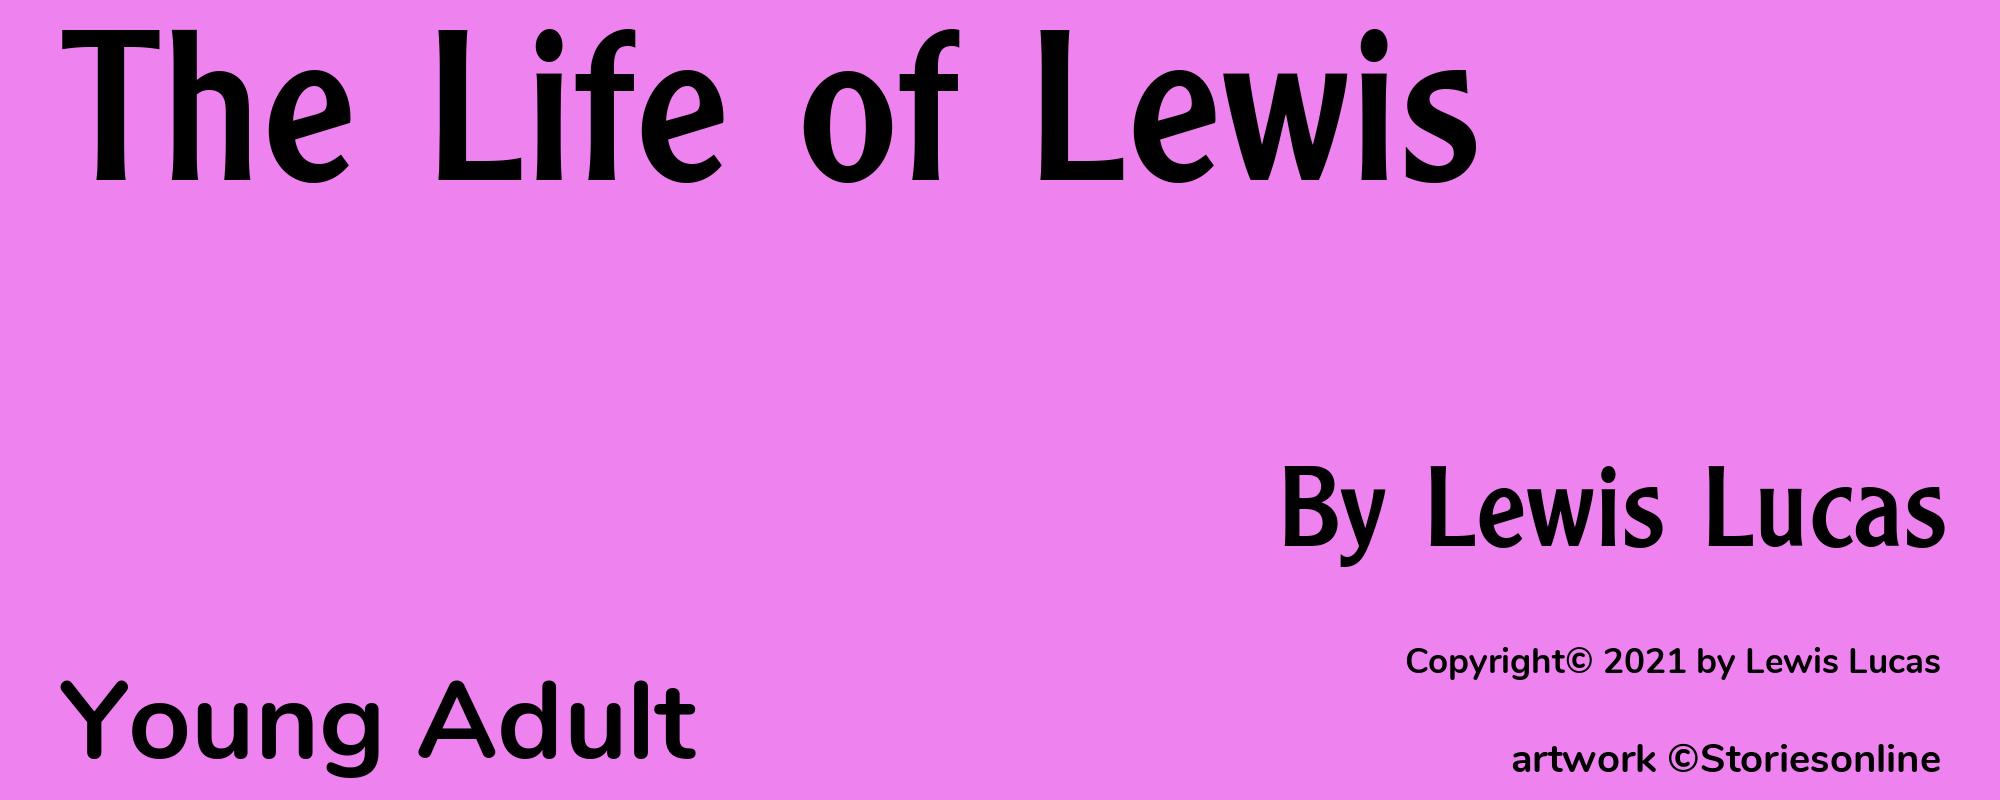 The Life of Lewis - Cover